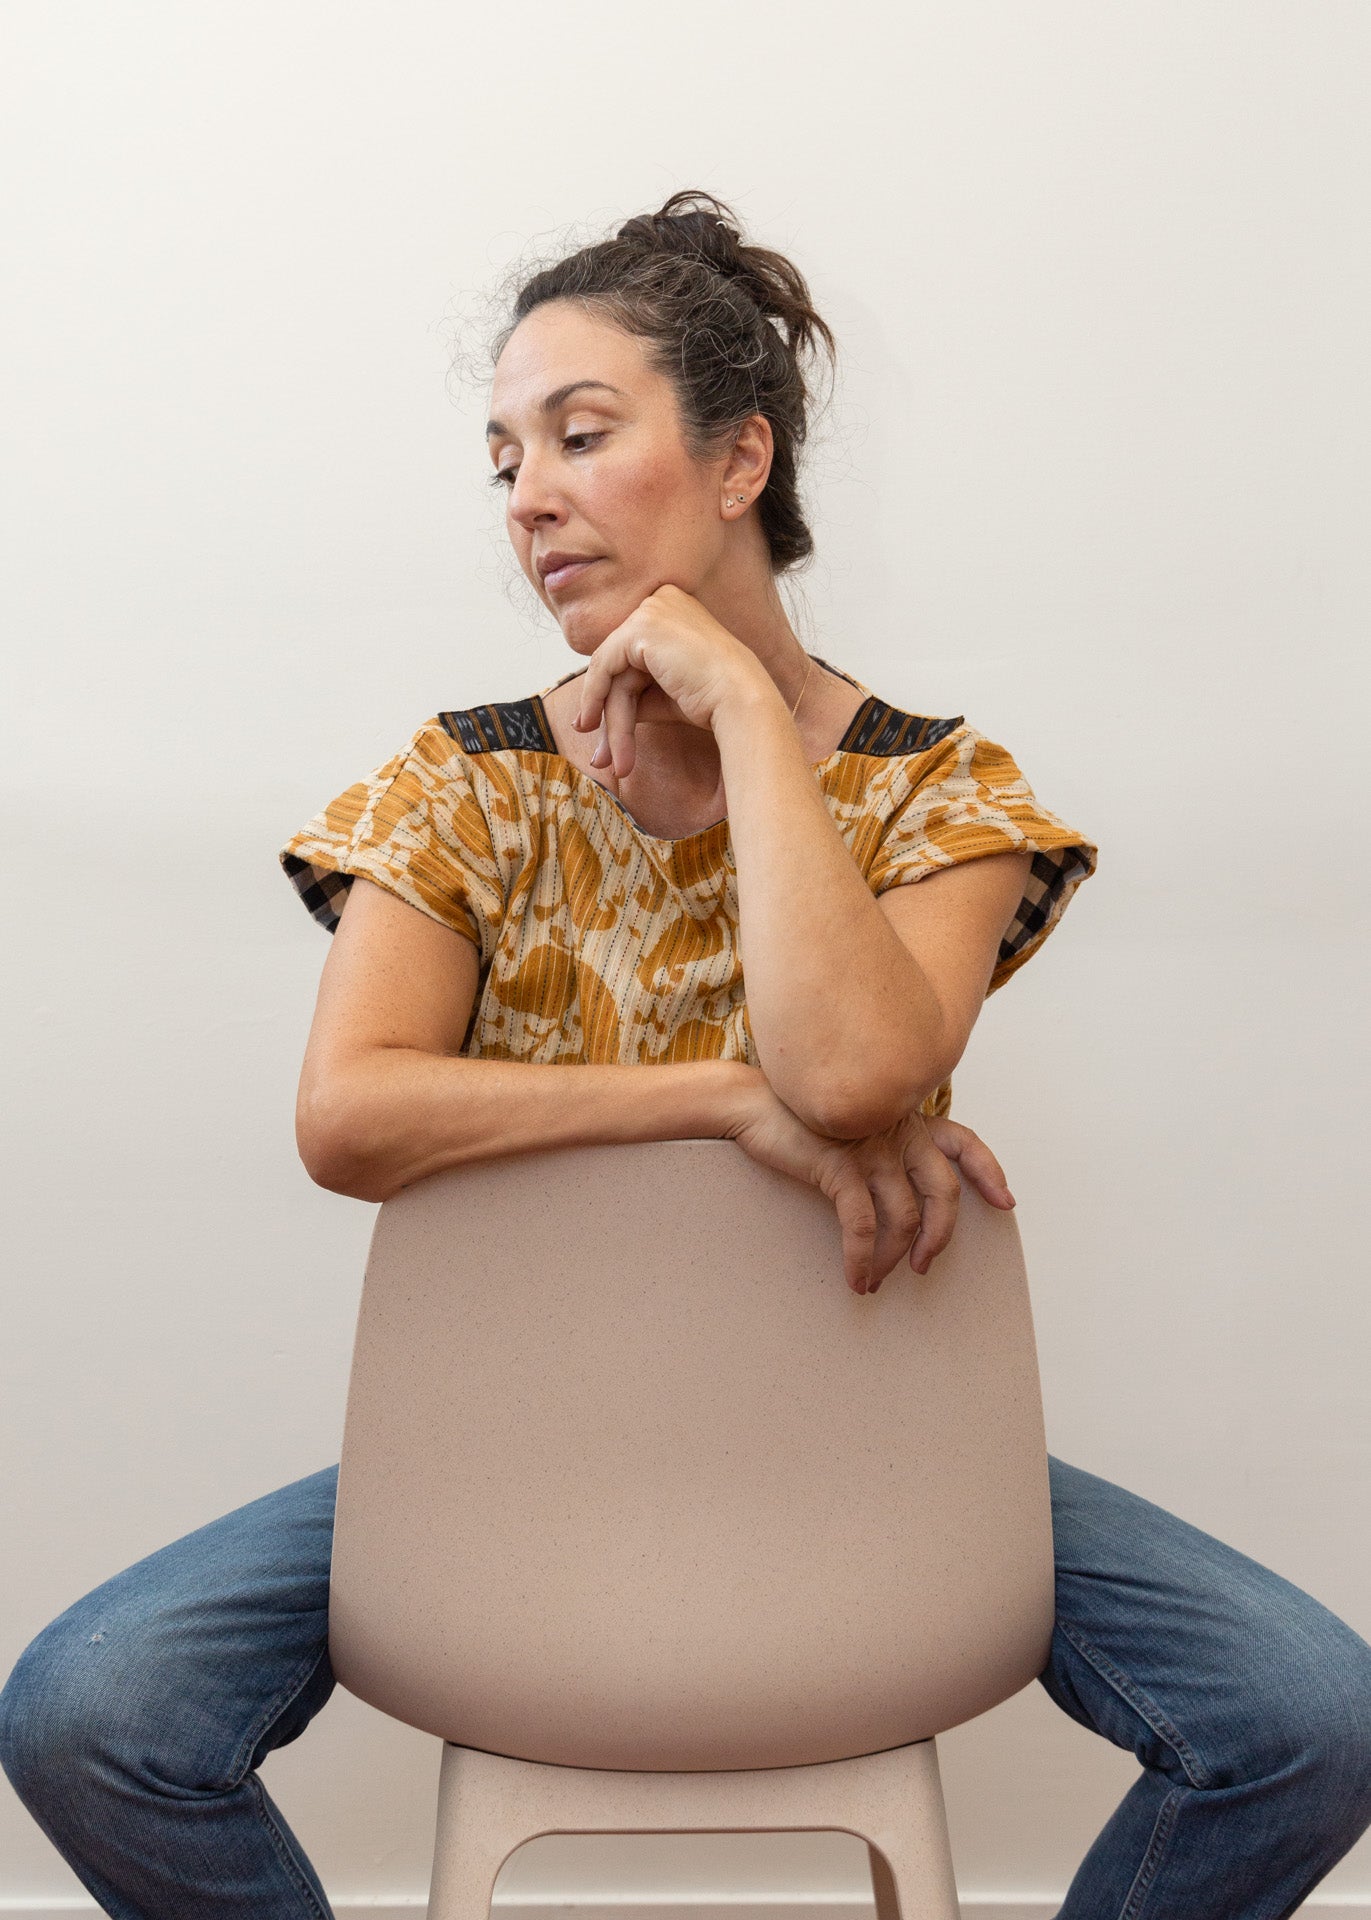 photo of a woman wearing the reversed mustard yellow color sitting on a chair backwards